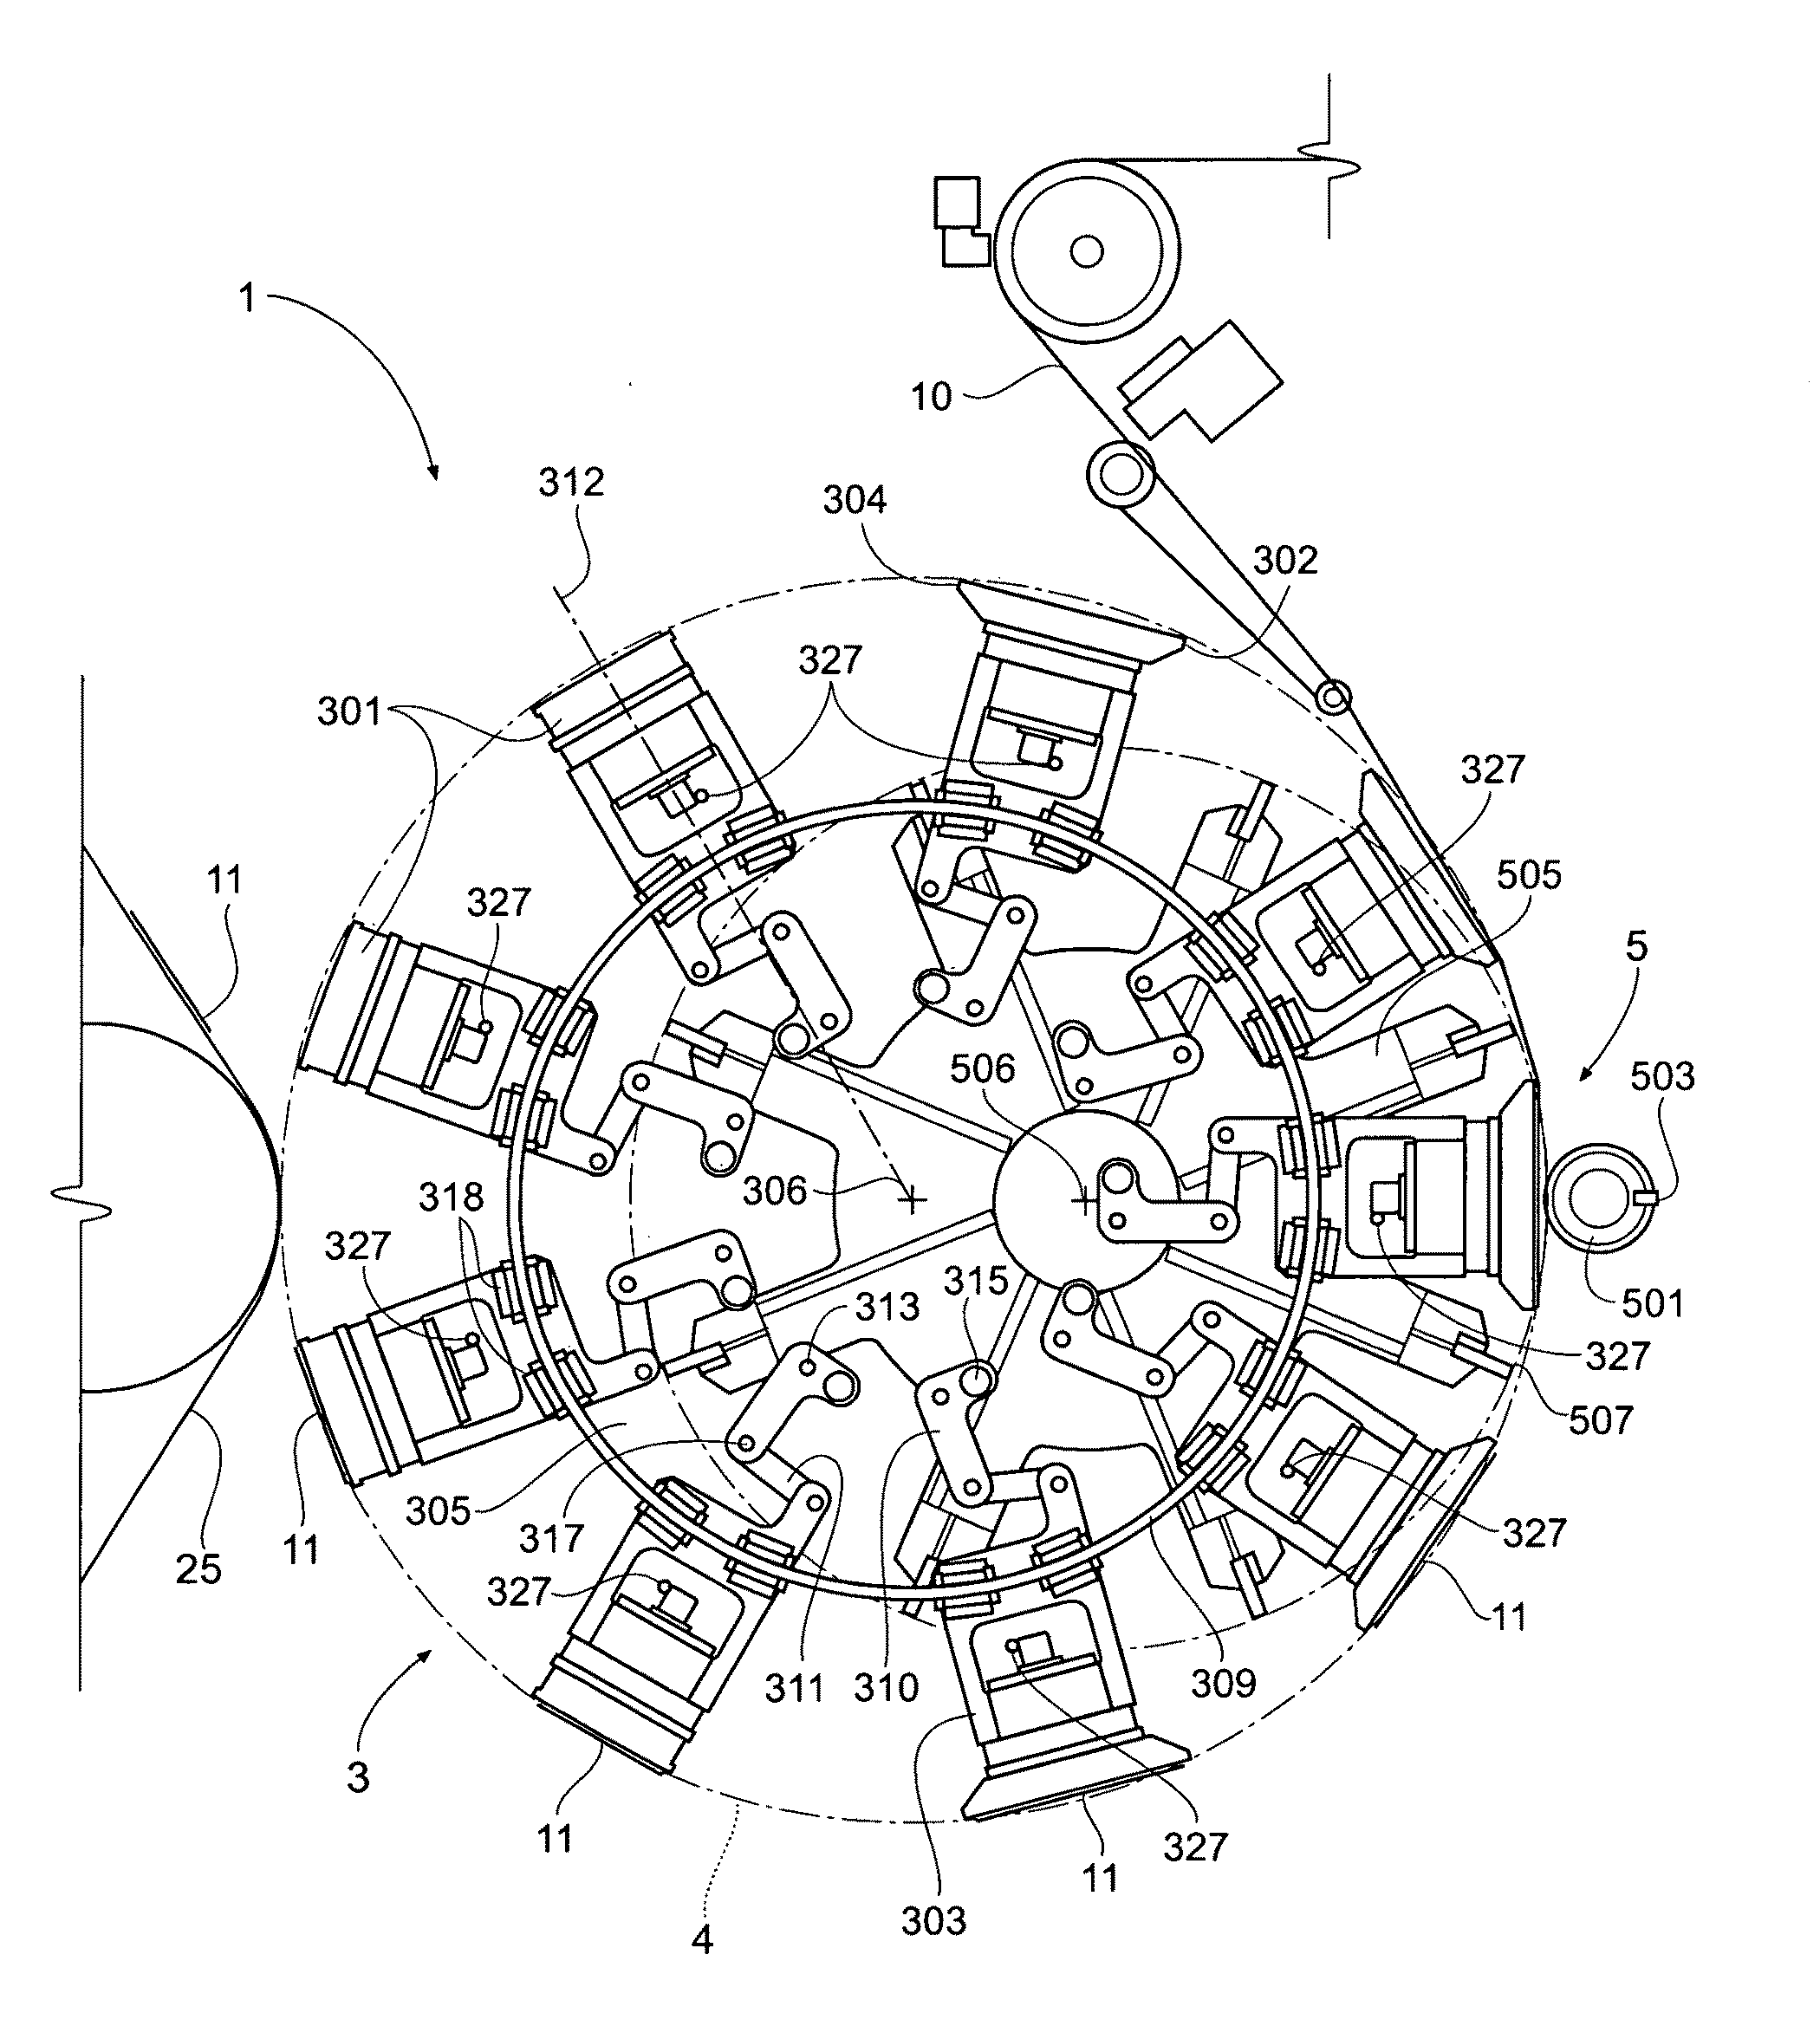 Single transfer insert placement method and apparatus